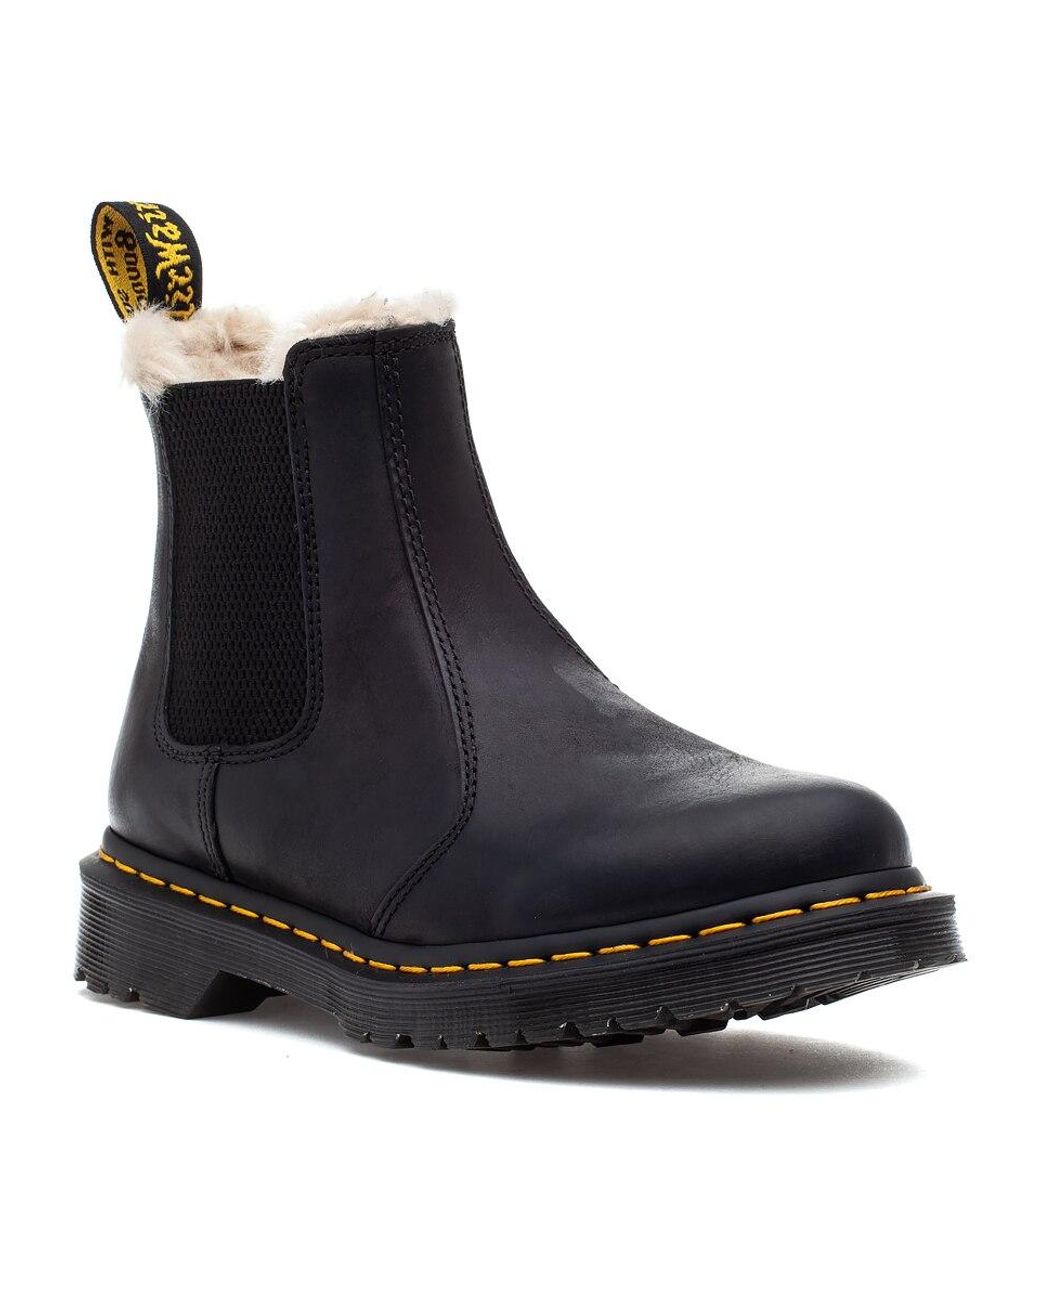 Dr. Martens Leonore Faux Fur Lined Chelsea Boot in Black | Lyst